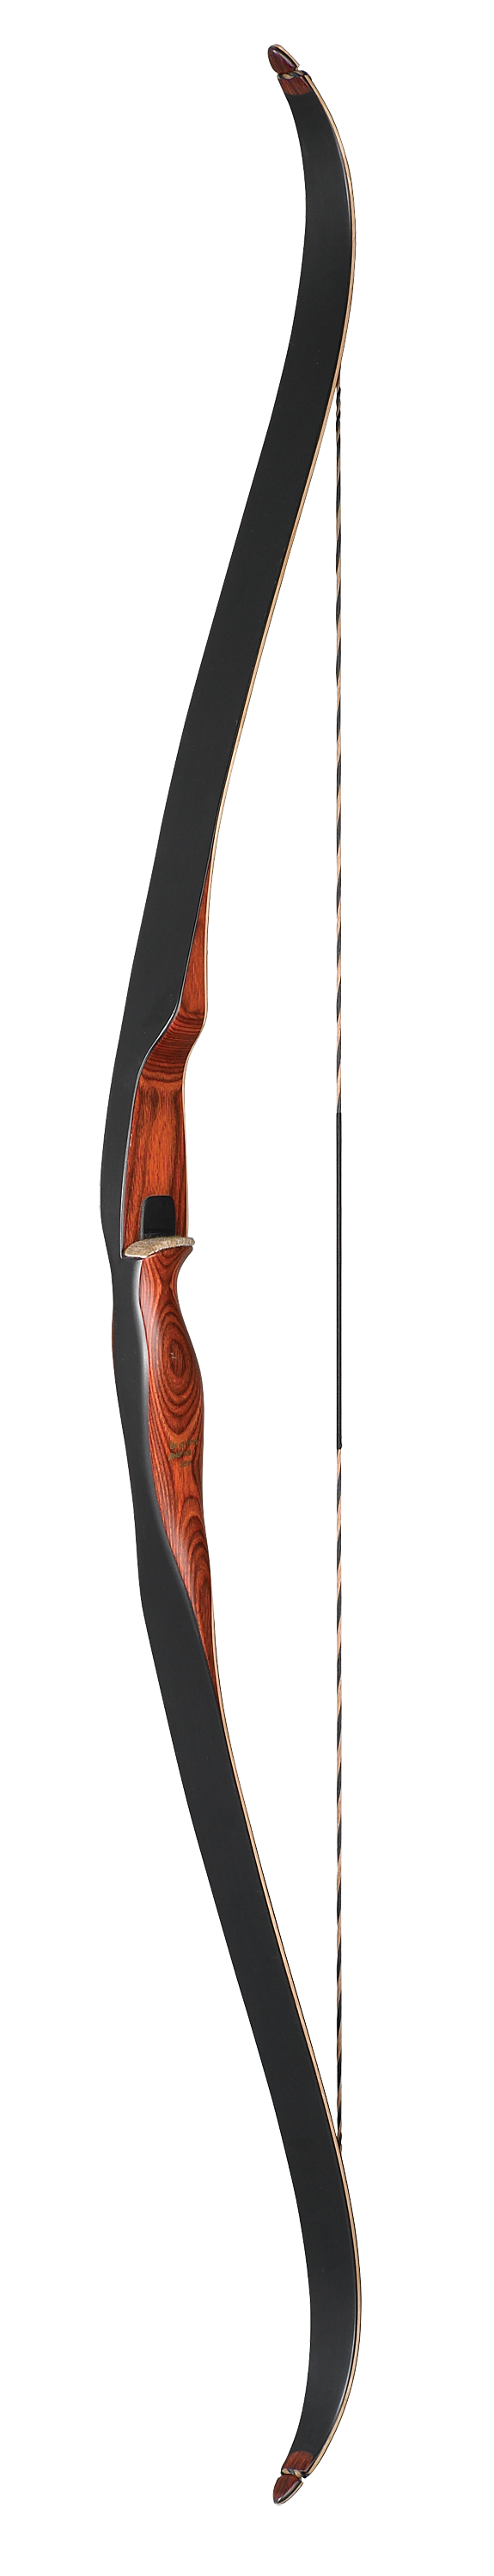 Fred Bear Grizzly Recurve Bow - 50 lb. Draw